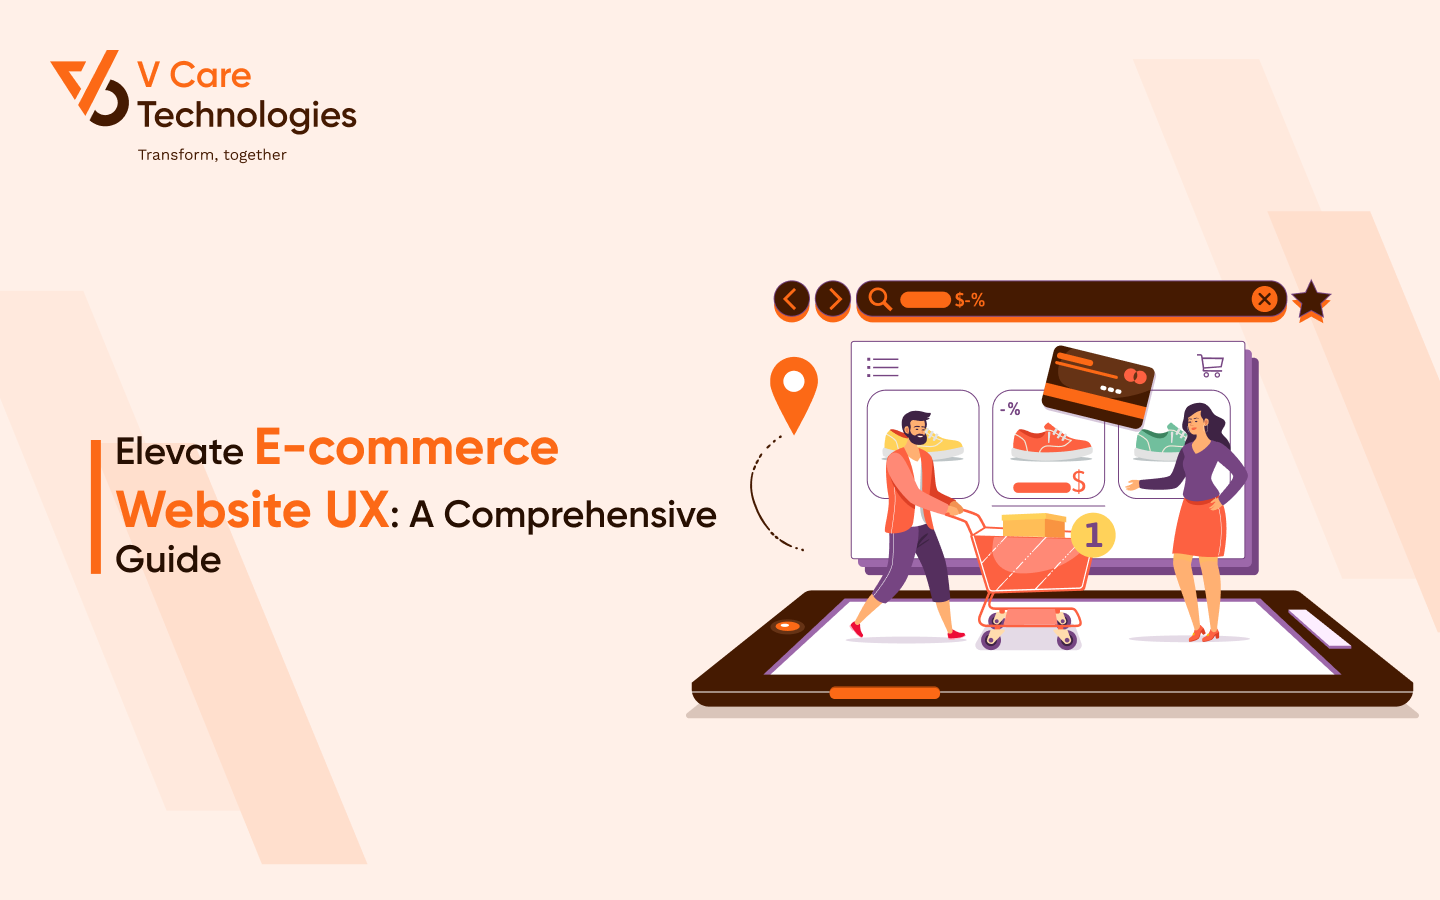 Elevate E-commerce Website User Experience: A Comprehensive Guide